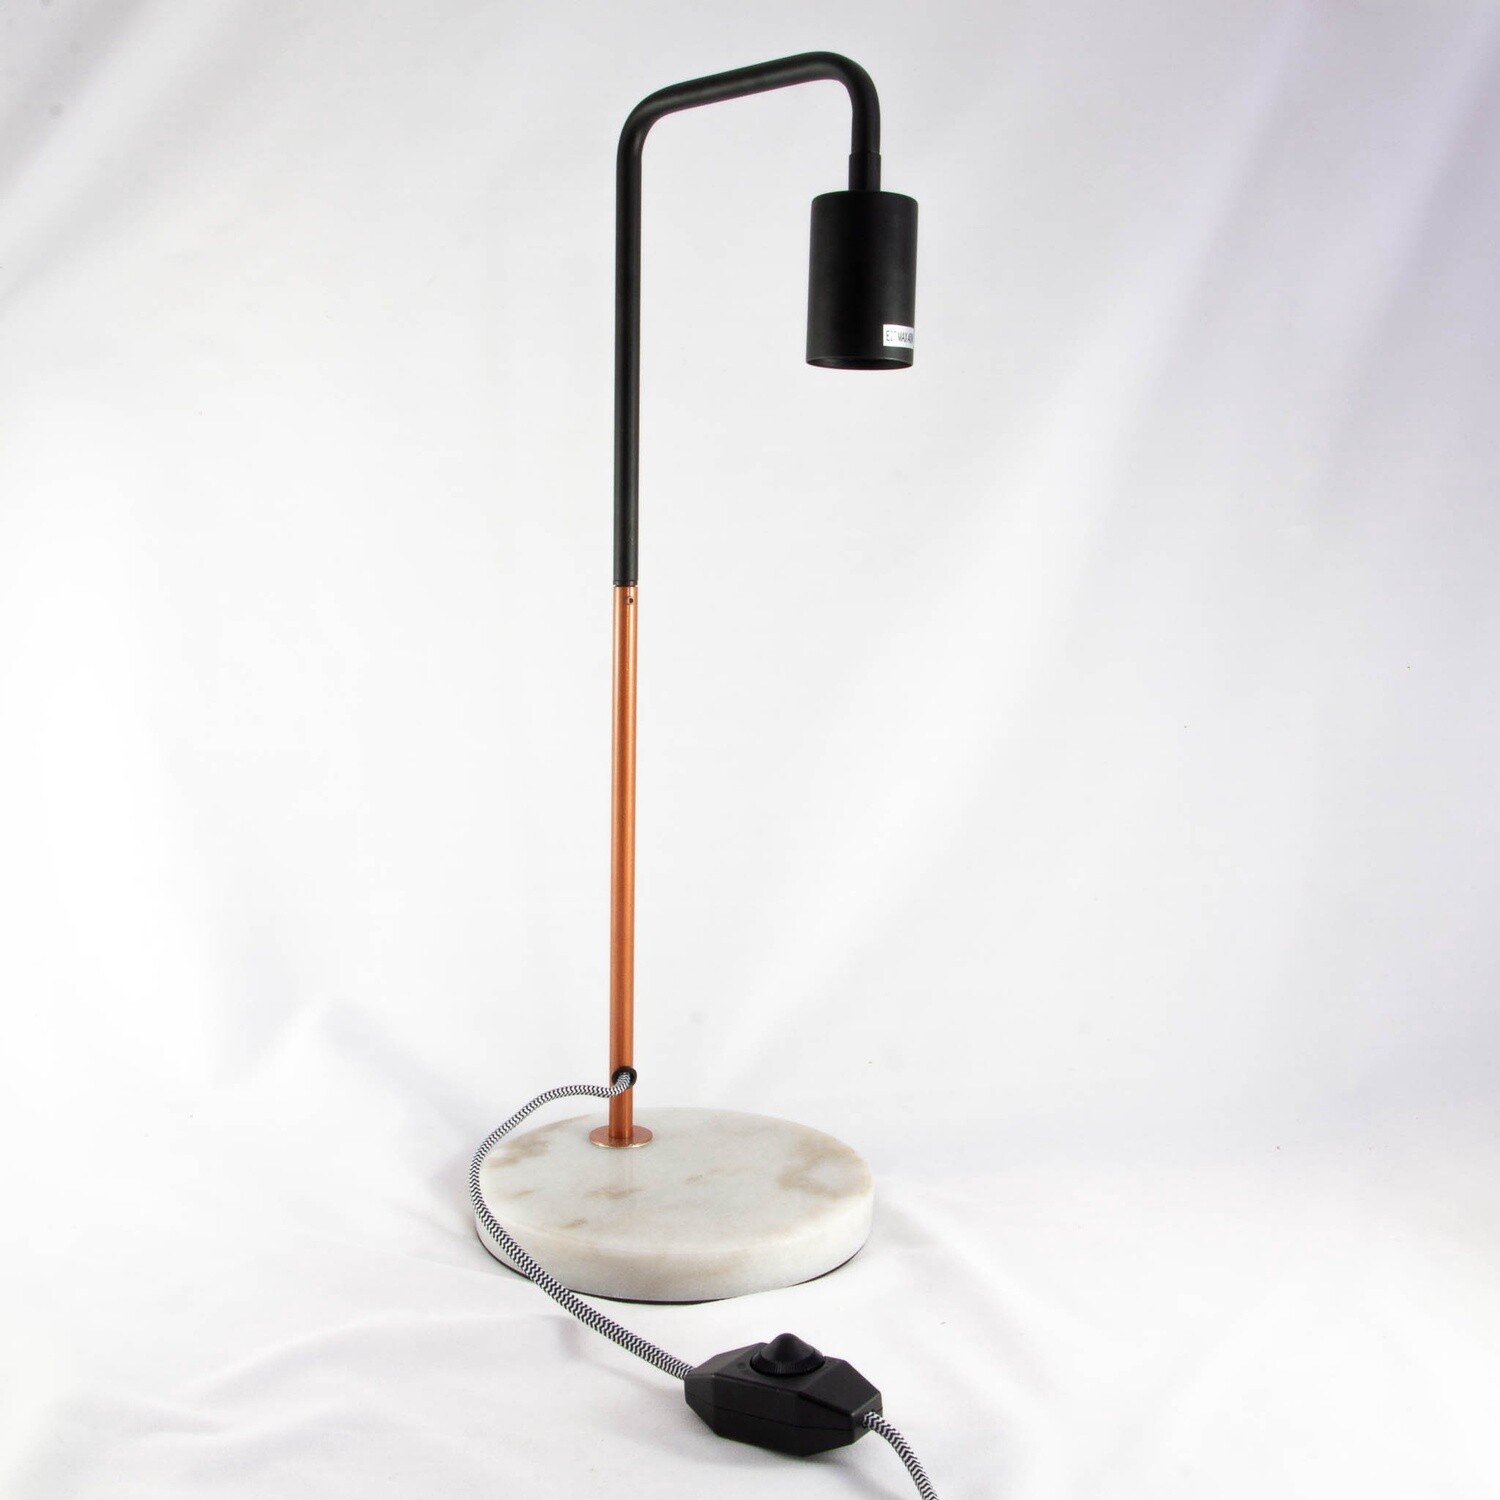 Dimmable Single Bulb Desk Lamp - Copper And Black